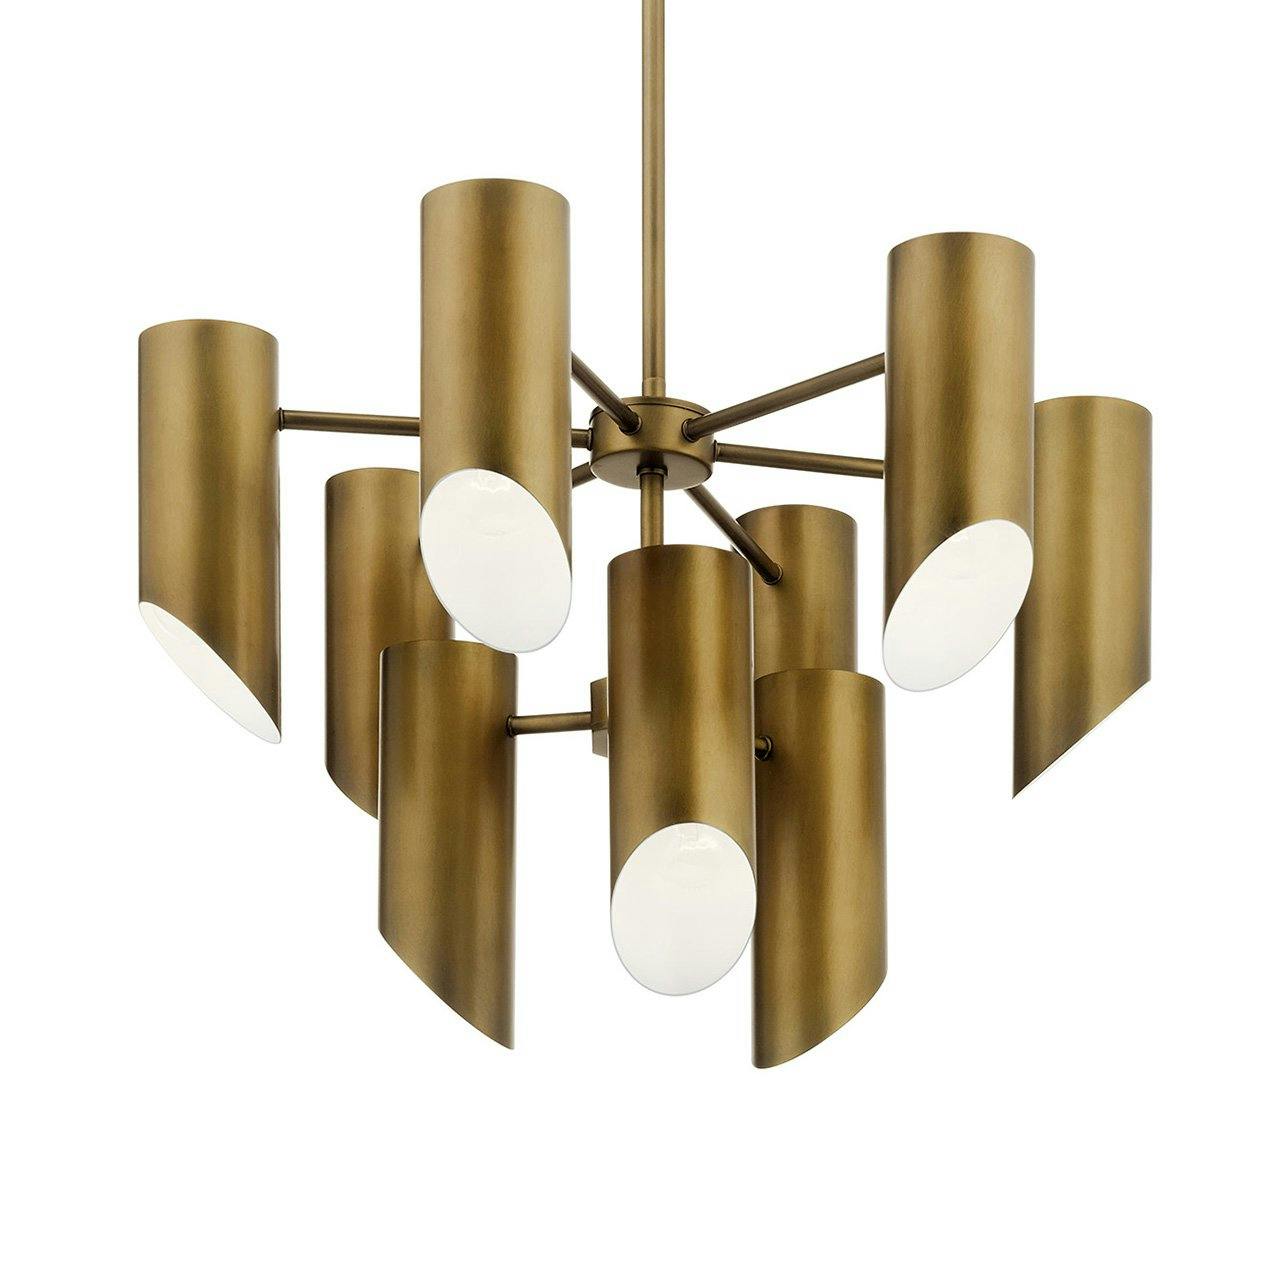 Trentino 9 Light Chandelier Natural Brass without the canopy on a white background